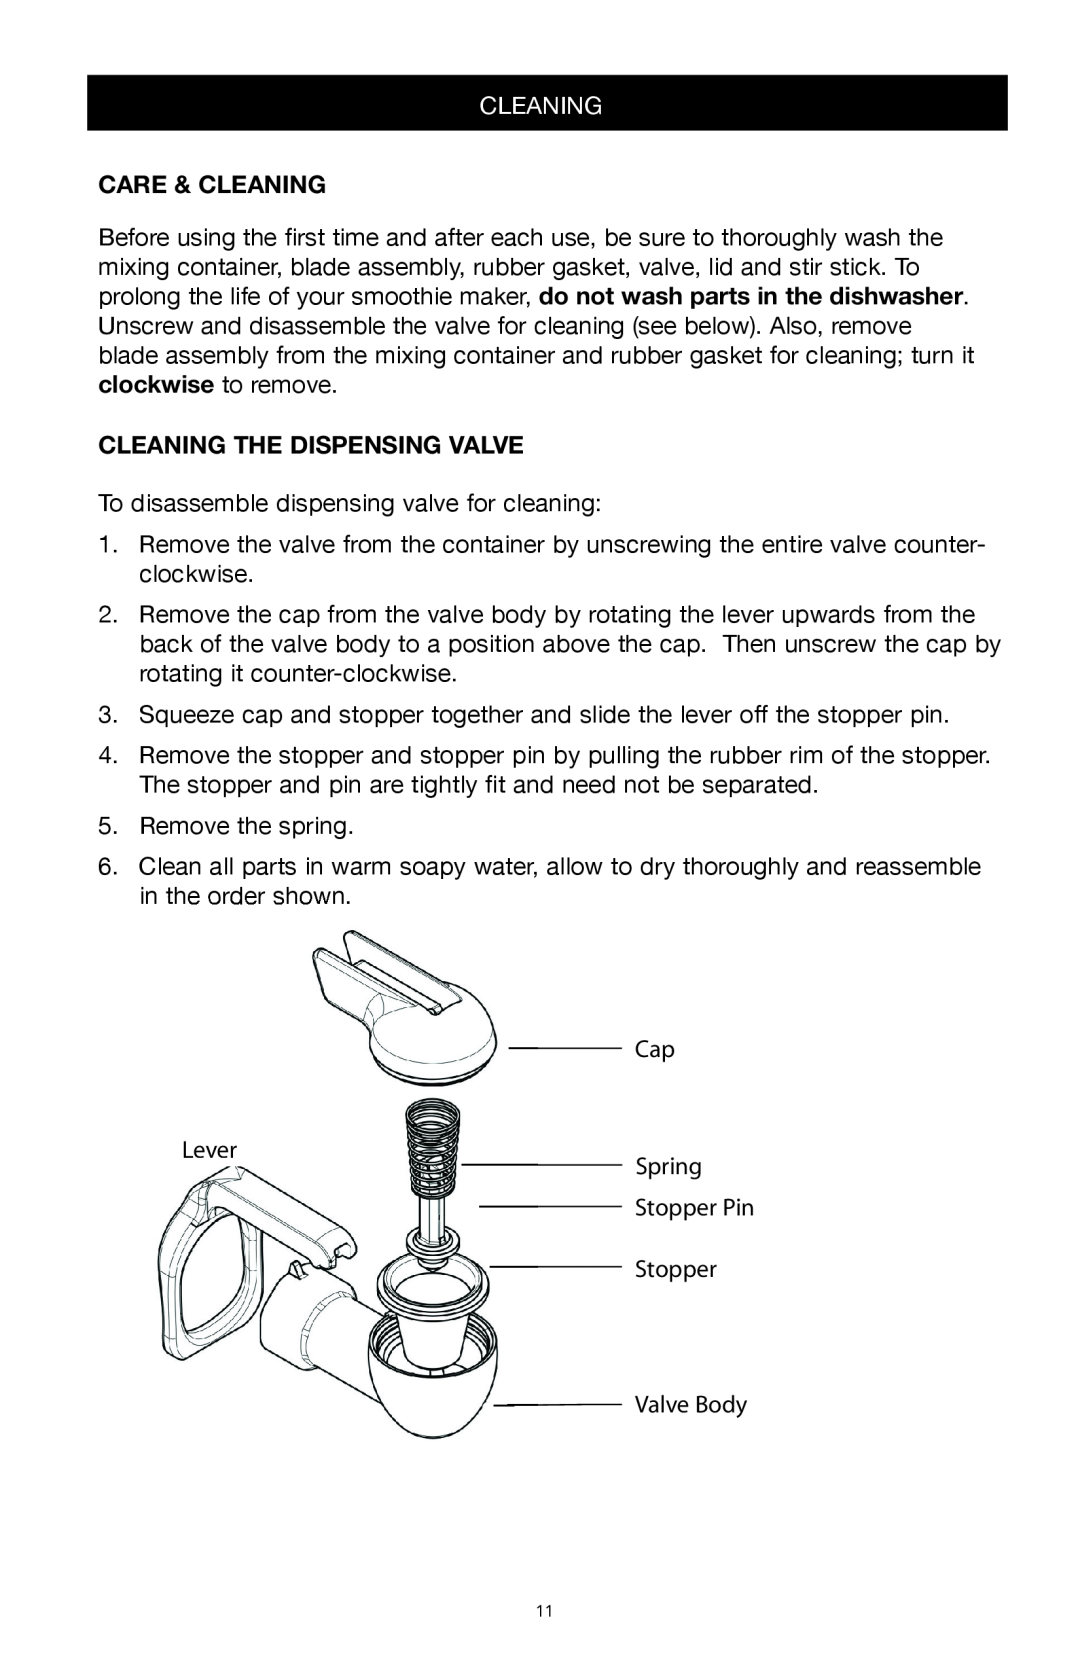 West Bend Back to Basics SR1000 manual Care & Cleaning, Cleaning The Dispensing Valve 